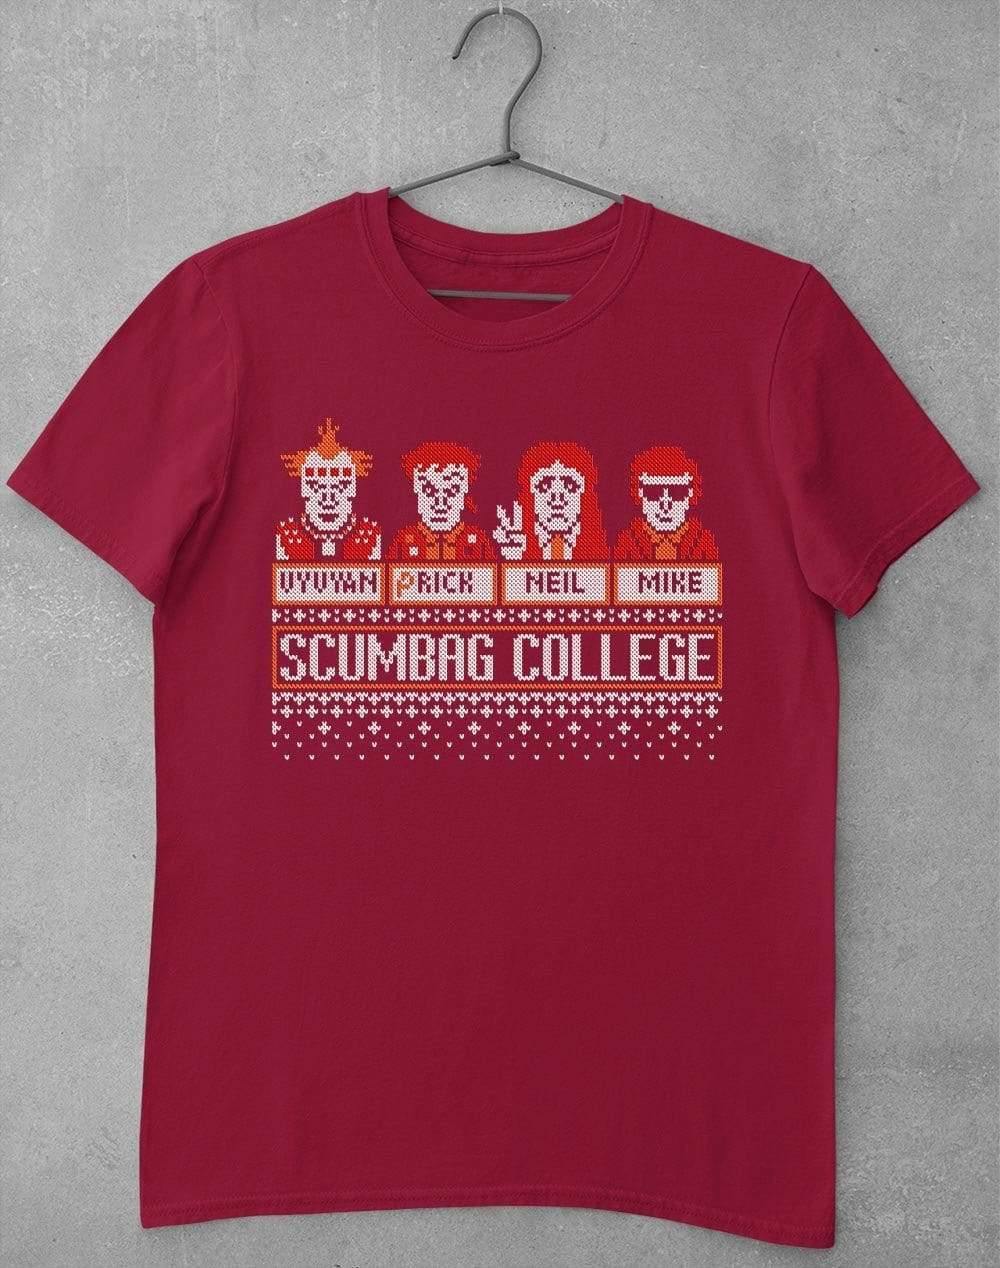 Scumbag College Festive Knitted-Look T-Shirt S / Cardinal Red  - Off World Tees